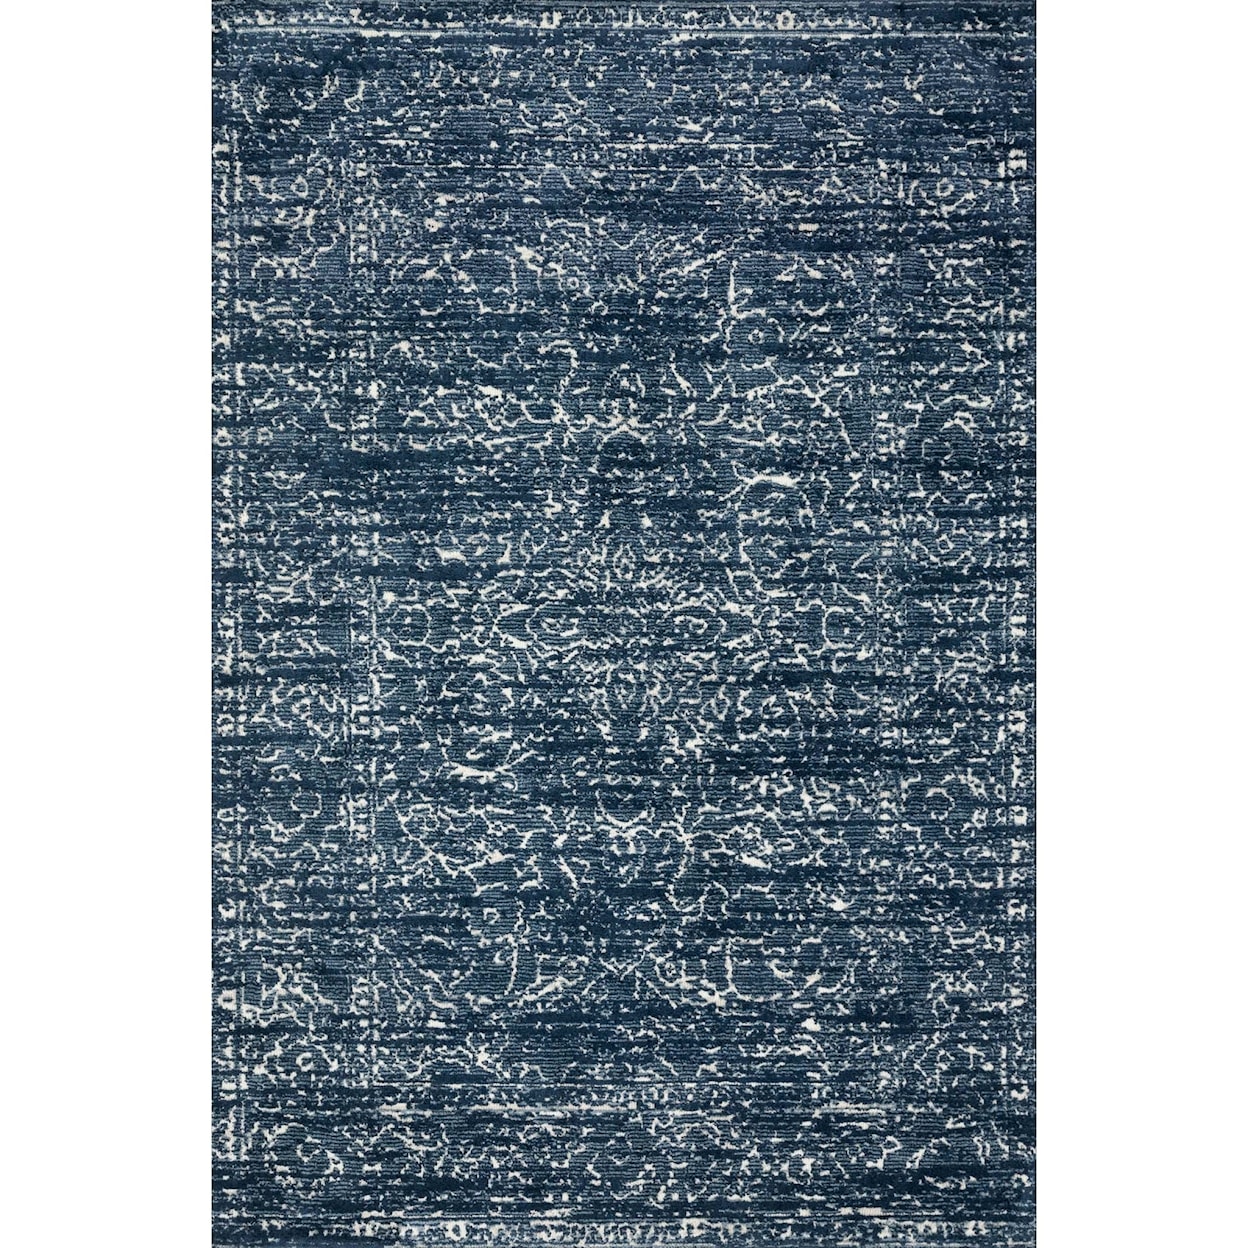 Magnolia Home by Joanna Gaines for Loloi Lotus 5'-0" x 7'-6" Rug